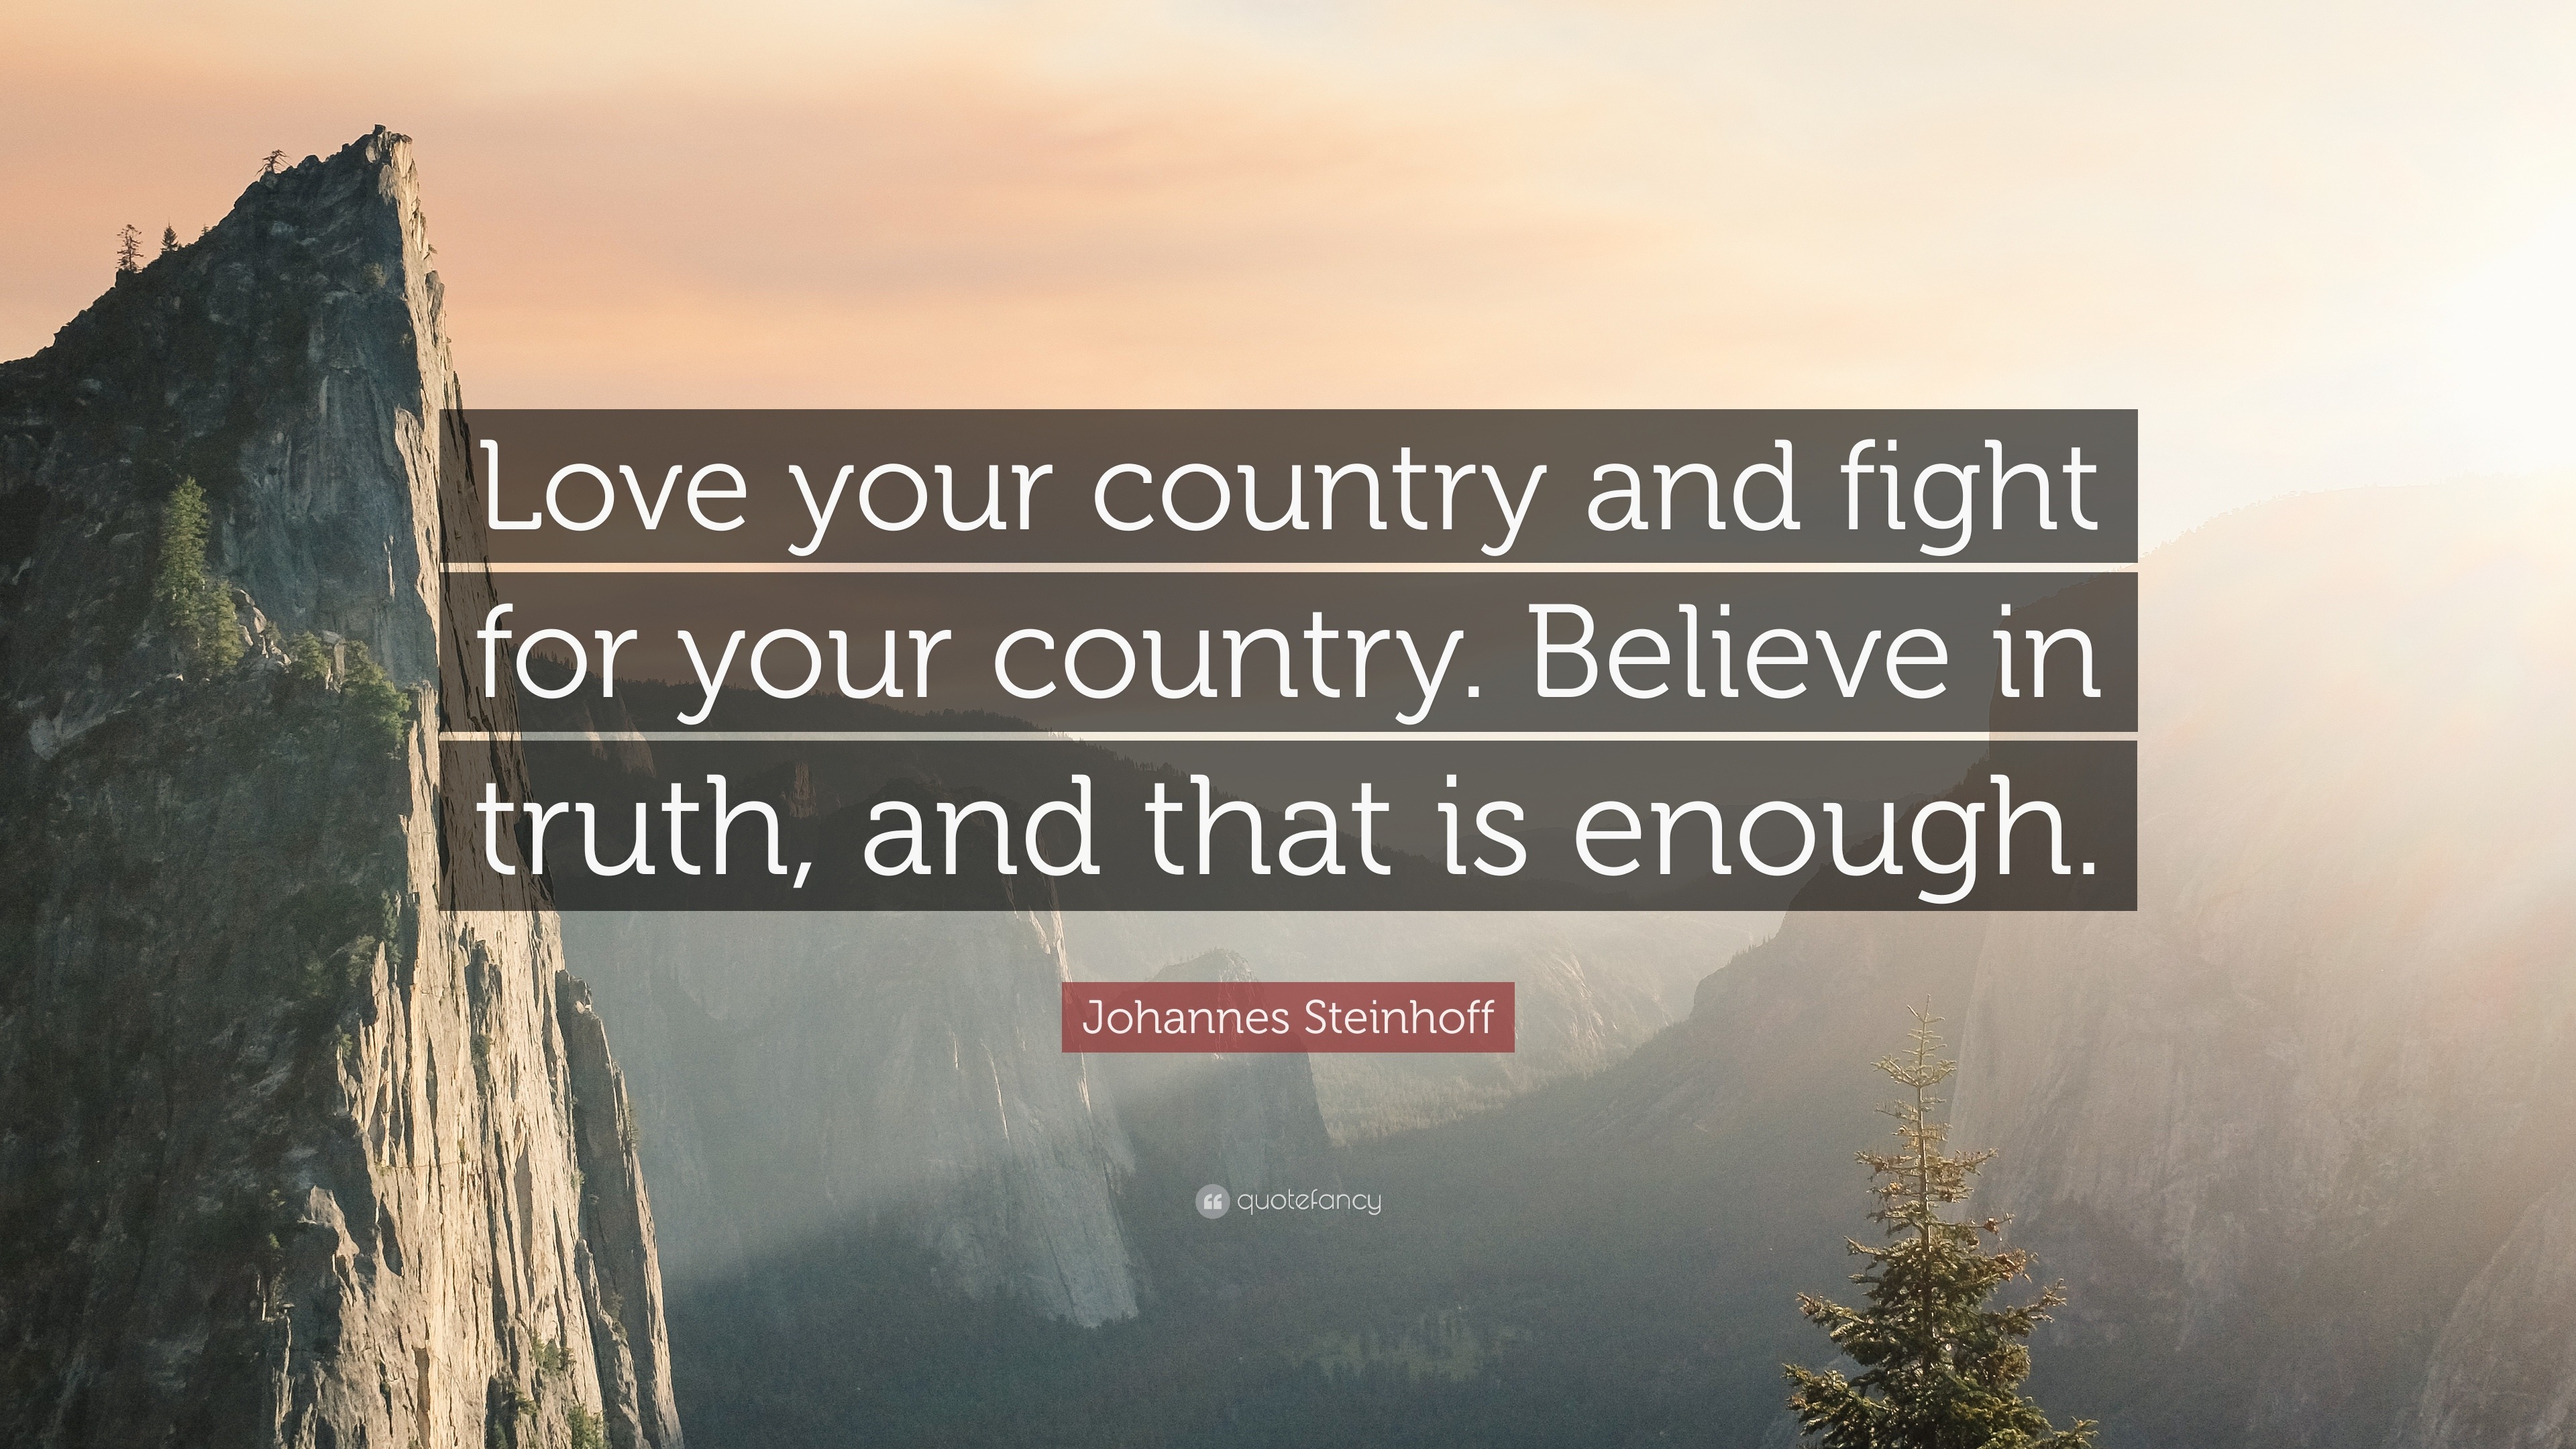 Johannes Steinhoff Quote: “Love your country and fight for your country